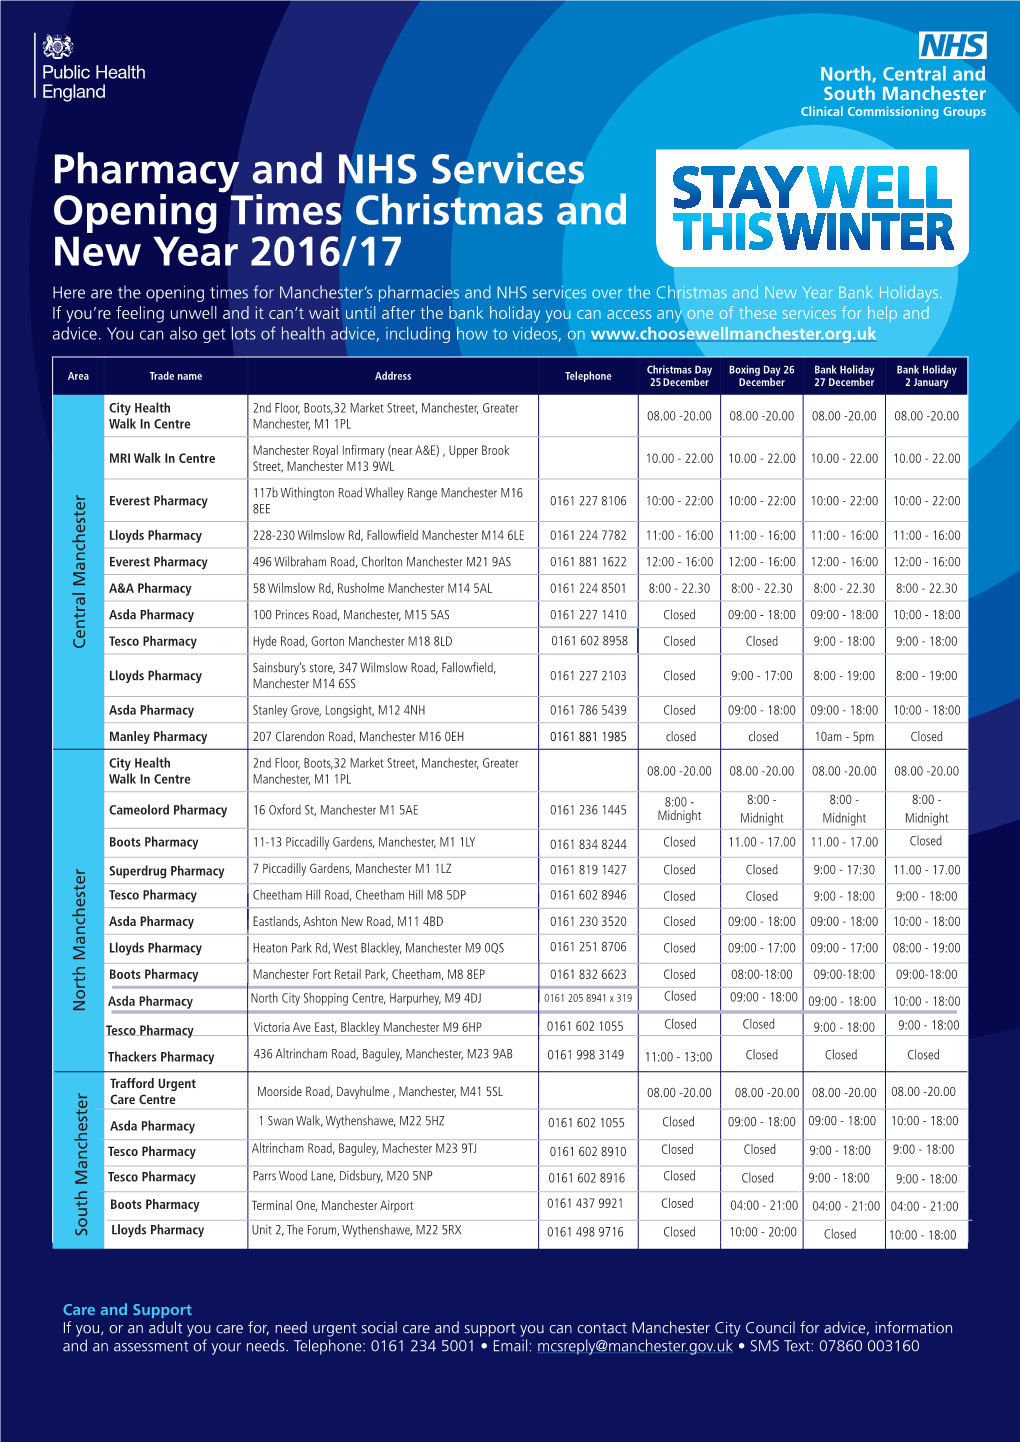 Pharmacy and NHS Services Opening Times Christmas and New Year